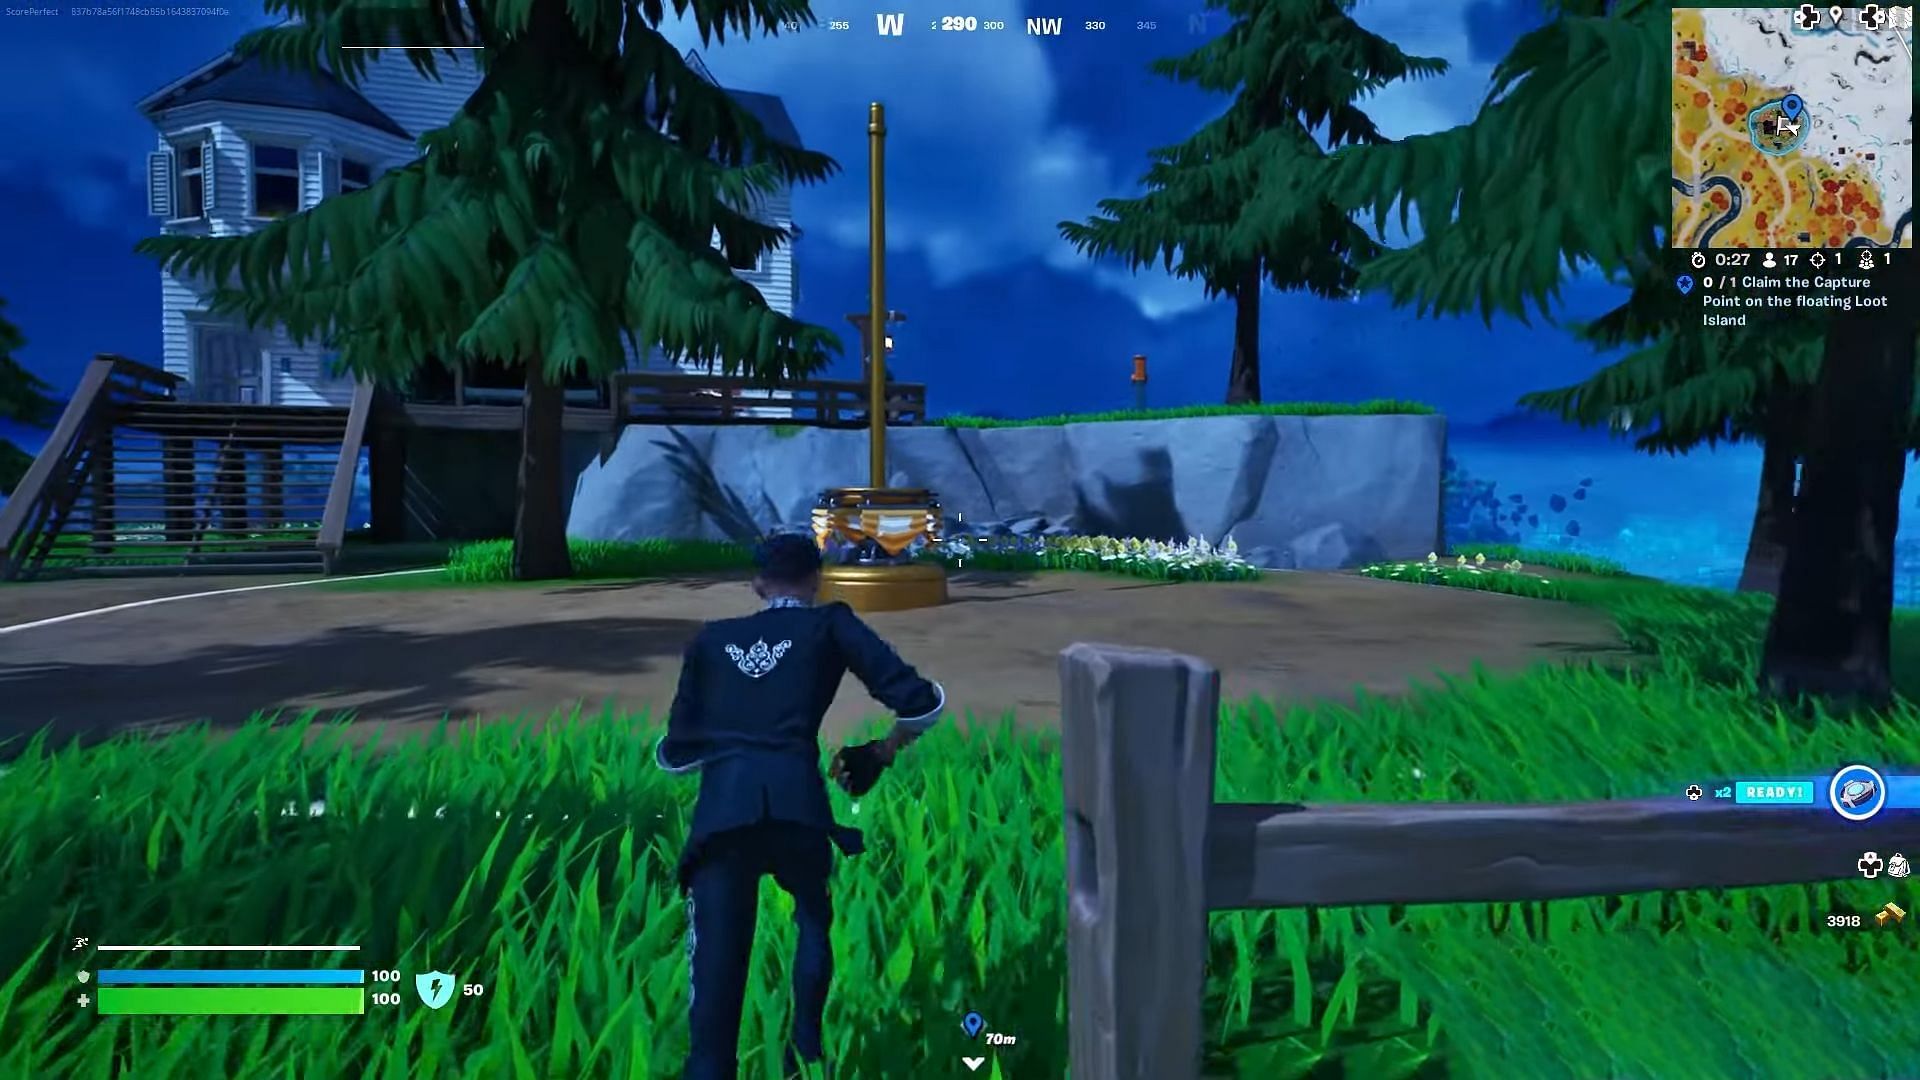 The Capture Point is located right in front of the house on the island (Image via Epic Games)